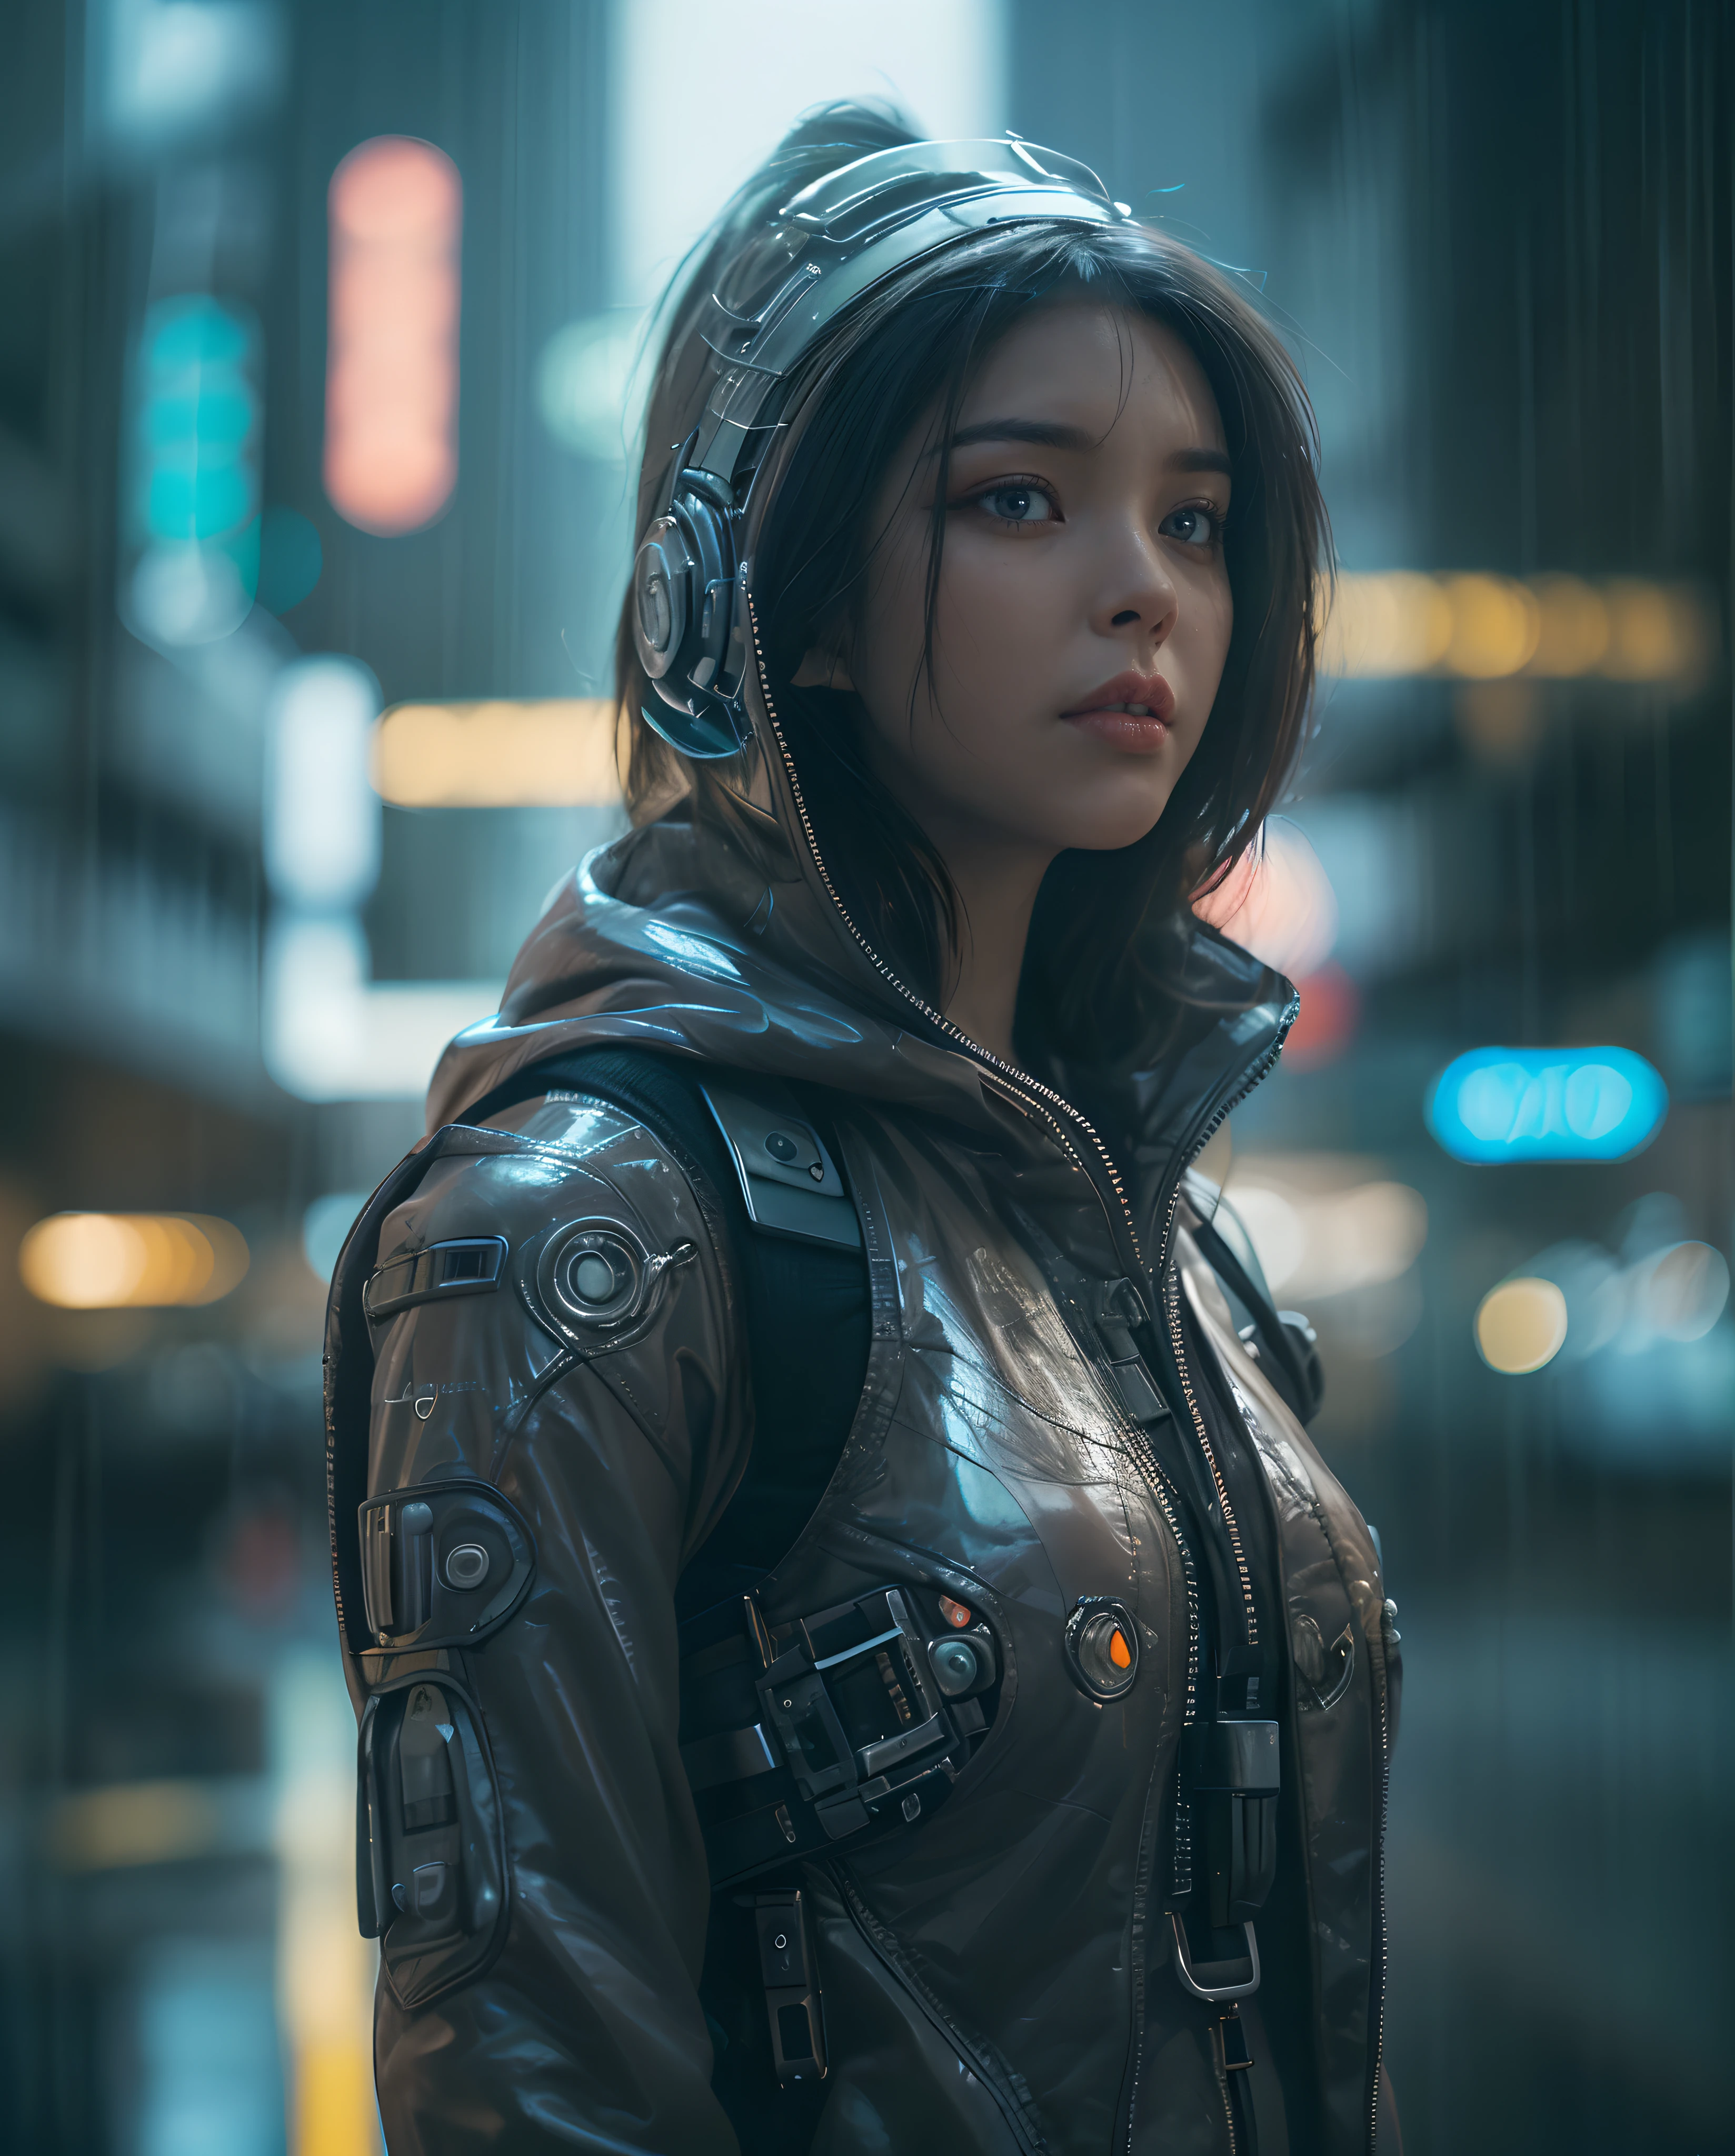 cinematic colorgrading film, dramatic scene, photography, RAW, Masterpiece, ultra wide angle, walking on the cyberpunk cityscapes, Ultra Fine Photo, (cyborg arms:1.3), medium breast, Best Quality, Ultra High Resolution, Photorealistic, volumetric light, Stunningly Beautiful, half body, Delicate Face, Vibrant Eyes, RAW photo, 1girl, solo, 1girl, (tang top:1.3), (techwea), future tech, futuristic, hologram augmented realities, (extremely detailed CG unity 8k wallpaper), of the most beautiful artwork in the world, professional photography, trending on ArtStation, trending on CGSociety, Intricate detail, High Detail, Sharp focus, dramatic, photorealistic, cyberpunk, futuristic, pale skin, slim body, (high detailed skin:1.2), 8k uhd, dslr, soft lighting, high quality, film grain, glossy, (Highest quality:1.3), (sharp focus:1.5), (photorealistic:1.3), (highly detailed skin), (detailed face), (high detailed skin:1.2), (glistening skin:1.2), cyborg arms, (highly detailed skin textures:1.15), (detailed face), (high detailed skin:1.2), (glistening skin:1.15), glossy, (cyborg arms:1.5), hoodie, rooftoop, japanese, cyberpunk street, (nights:1.2), fog, (rain:1.2), film grain, glossy, water reflection, reelmech